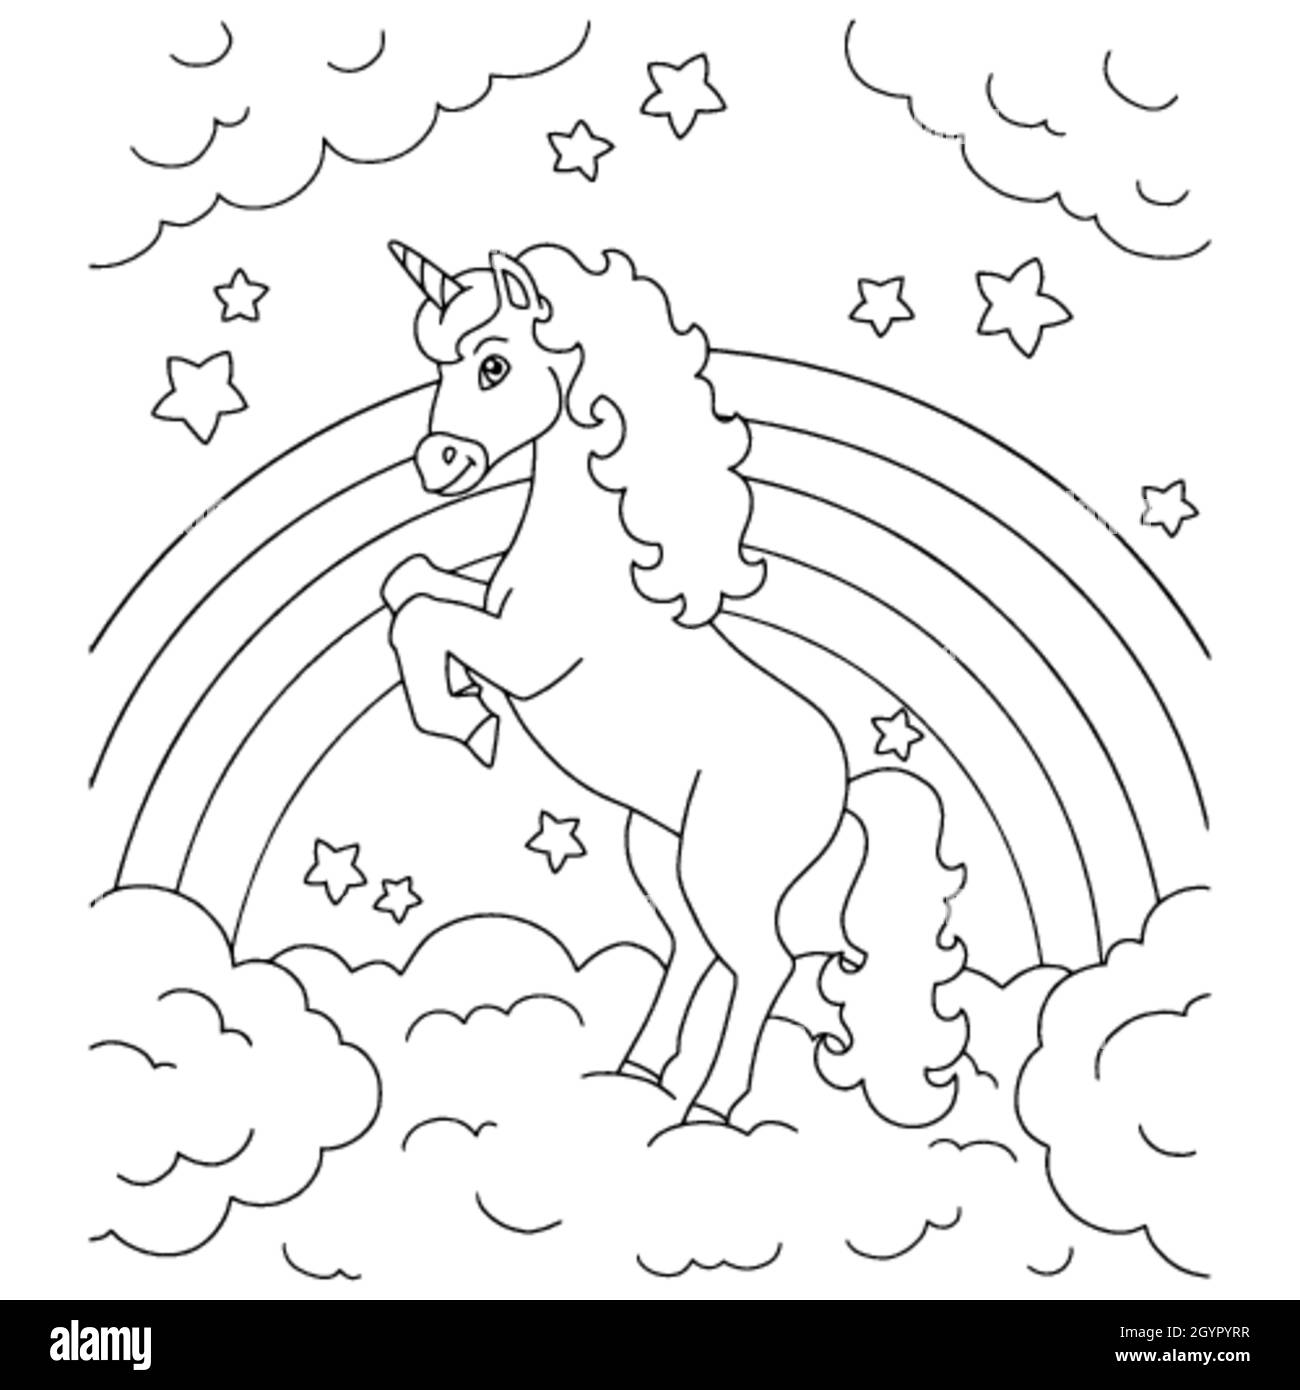 Unicorn on a cloud. Coloring book page for kids. Cartoon style character. Vector illustration isolated on white background. Stock Vector